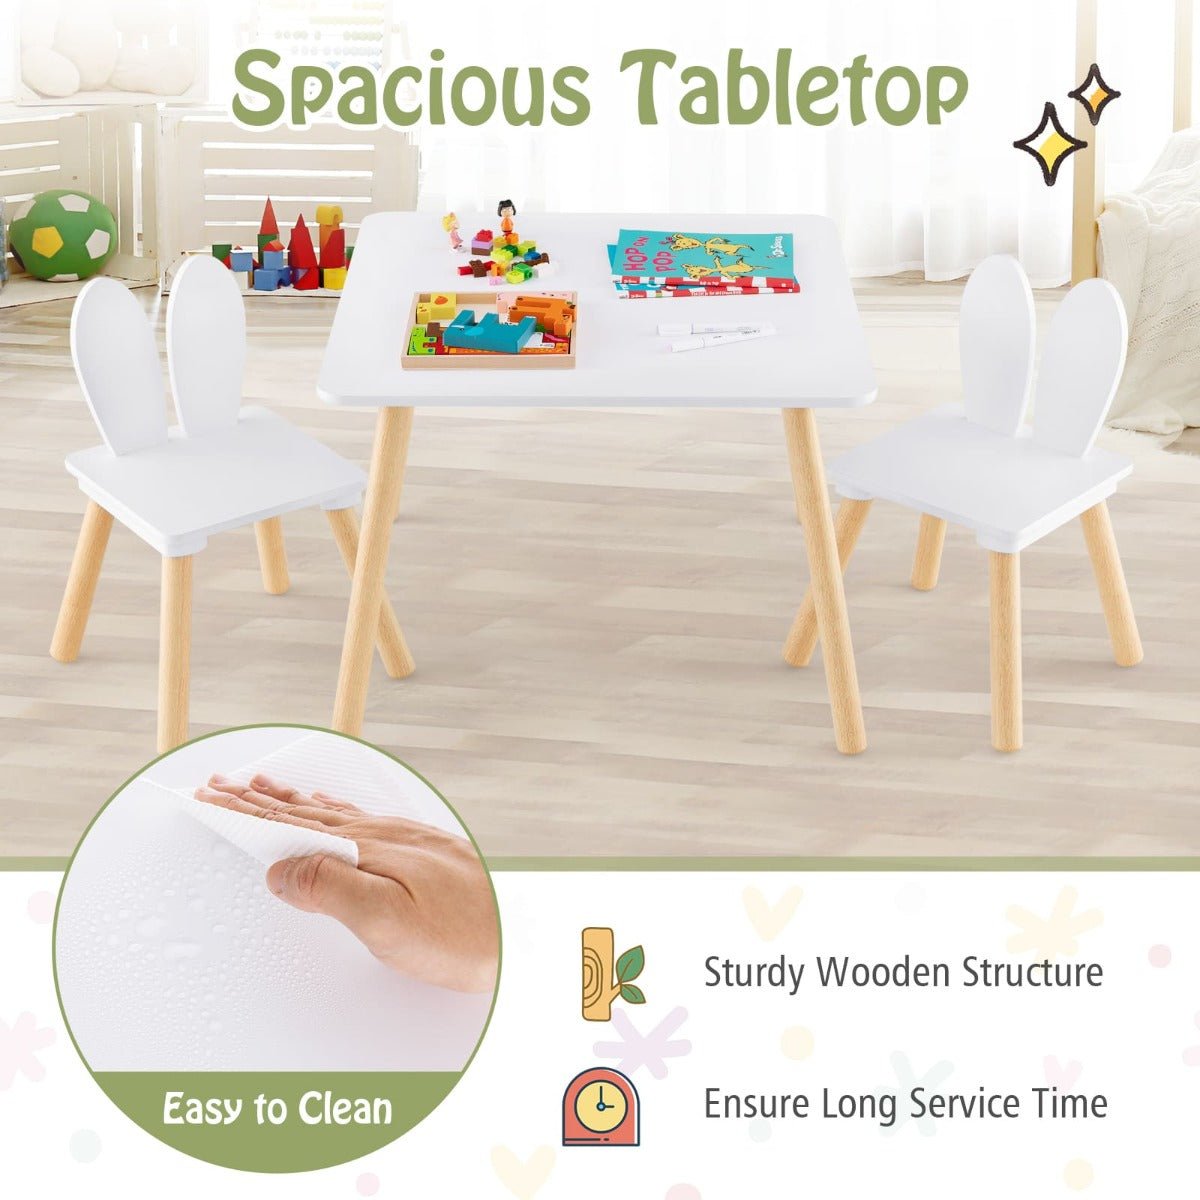 Bunny-Eared Chair and White Table Set for Creative Play - Kids Mega Mart